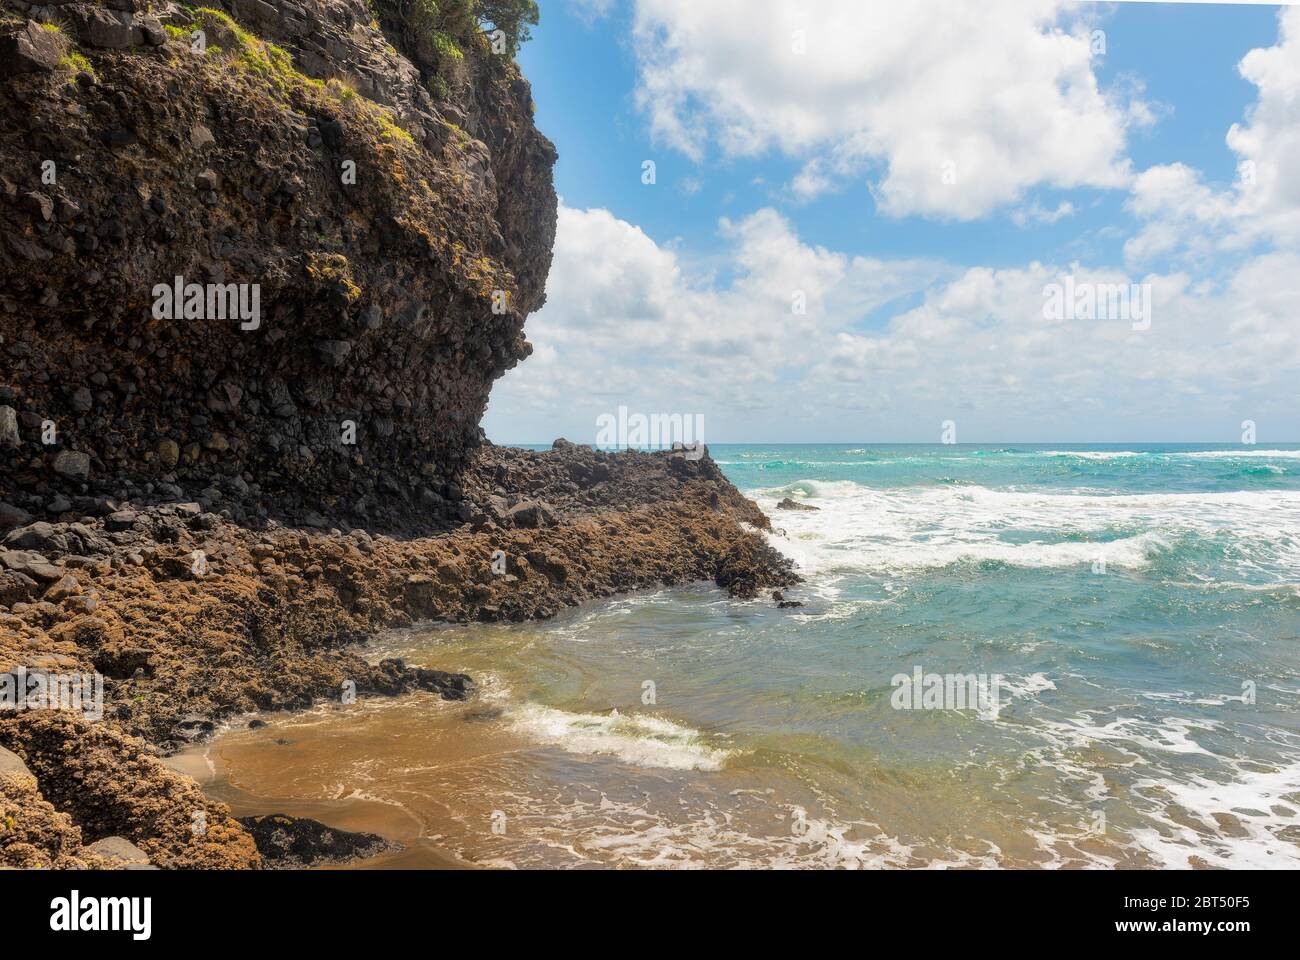 Waves pounding a rocky shore under blue cloudy skies Stock Photo